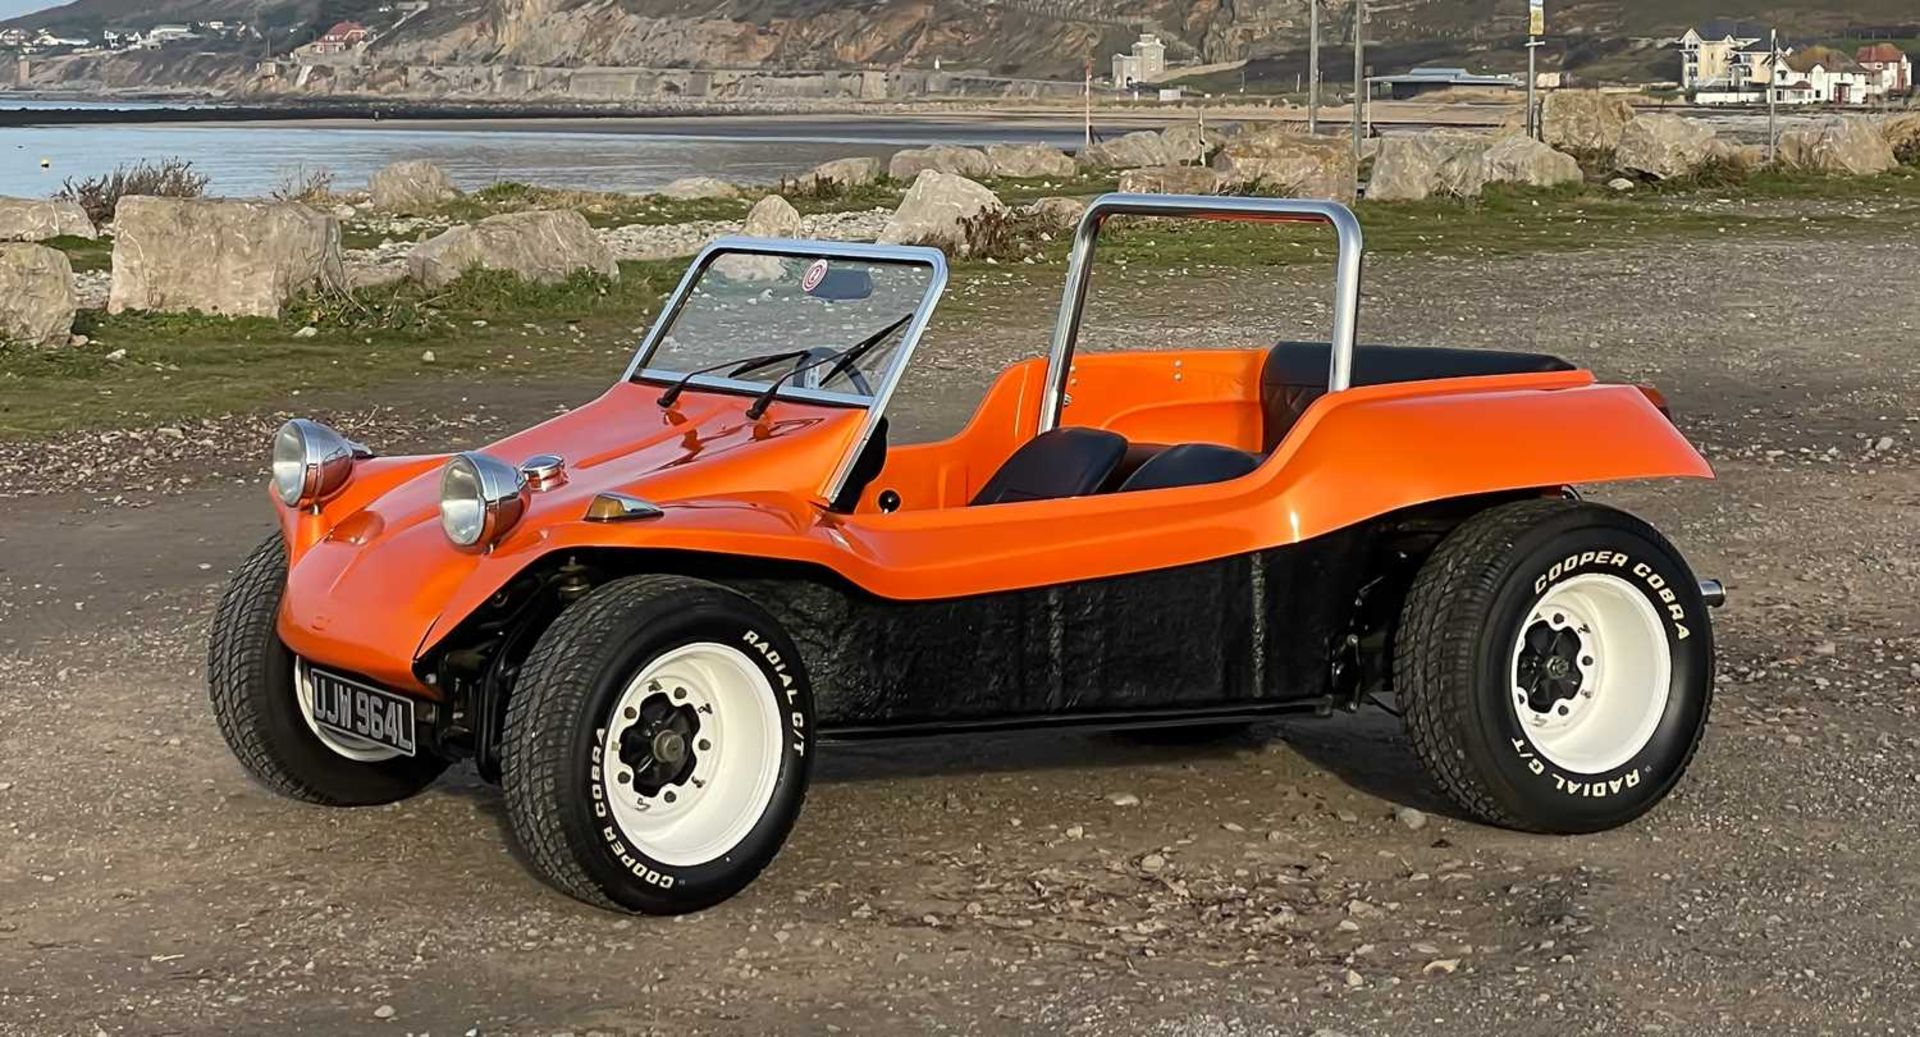 1972 Volkswagen Short-wheelbase GT Beach Buggy GT SWB body, believed to be one of six examples - Image 3 of 18